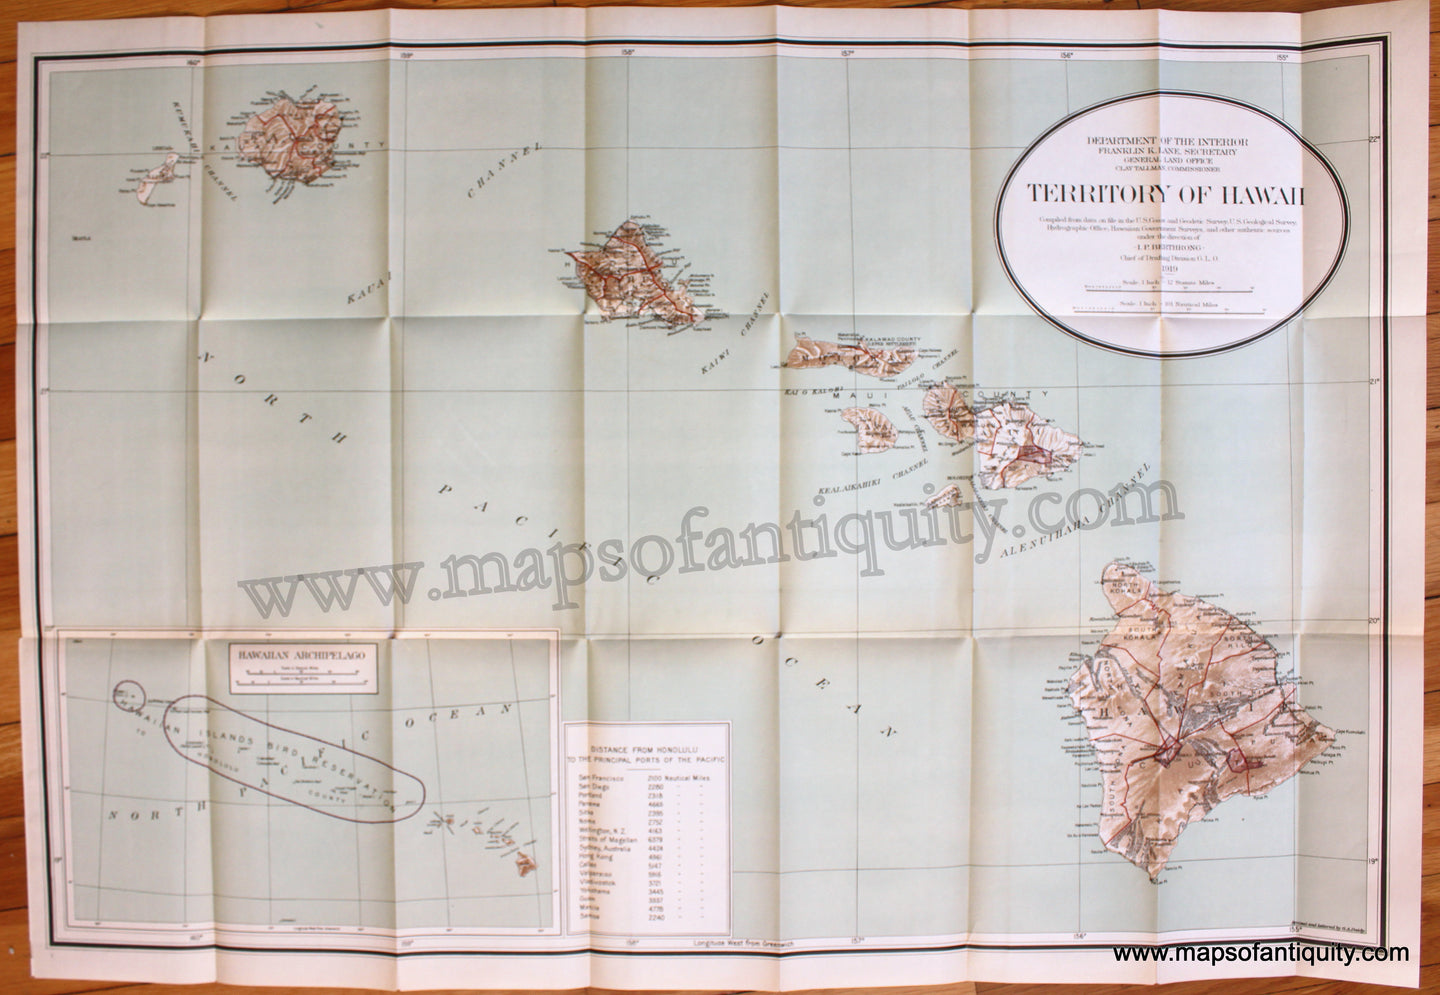 Antique-Map-Territory-of-Hawaii-Berthrong-United-States-Coast-and-Geodetic-Survey-1919-1900s-Early-20th-Century-Maps-of-Antiquity